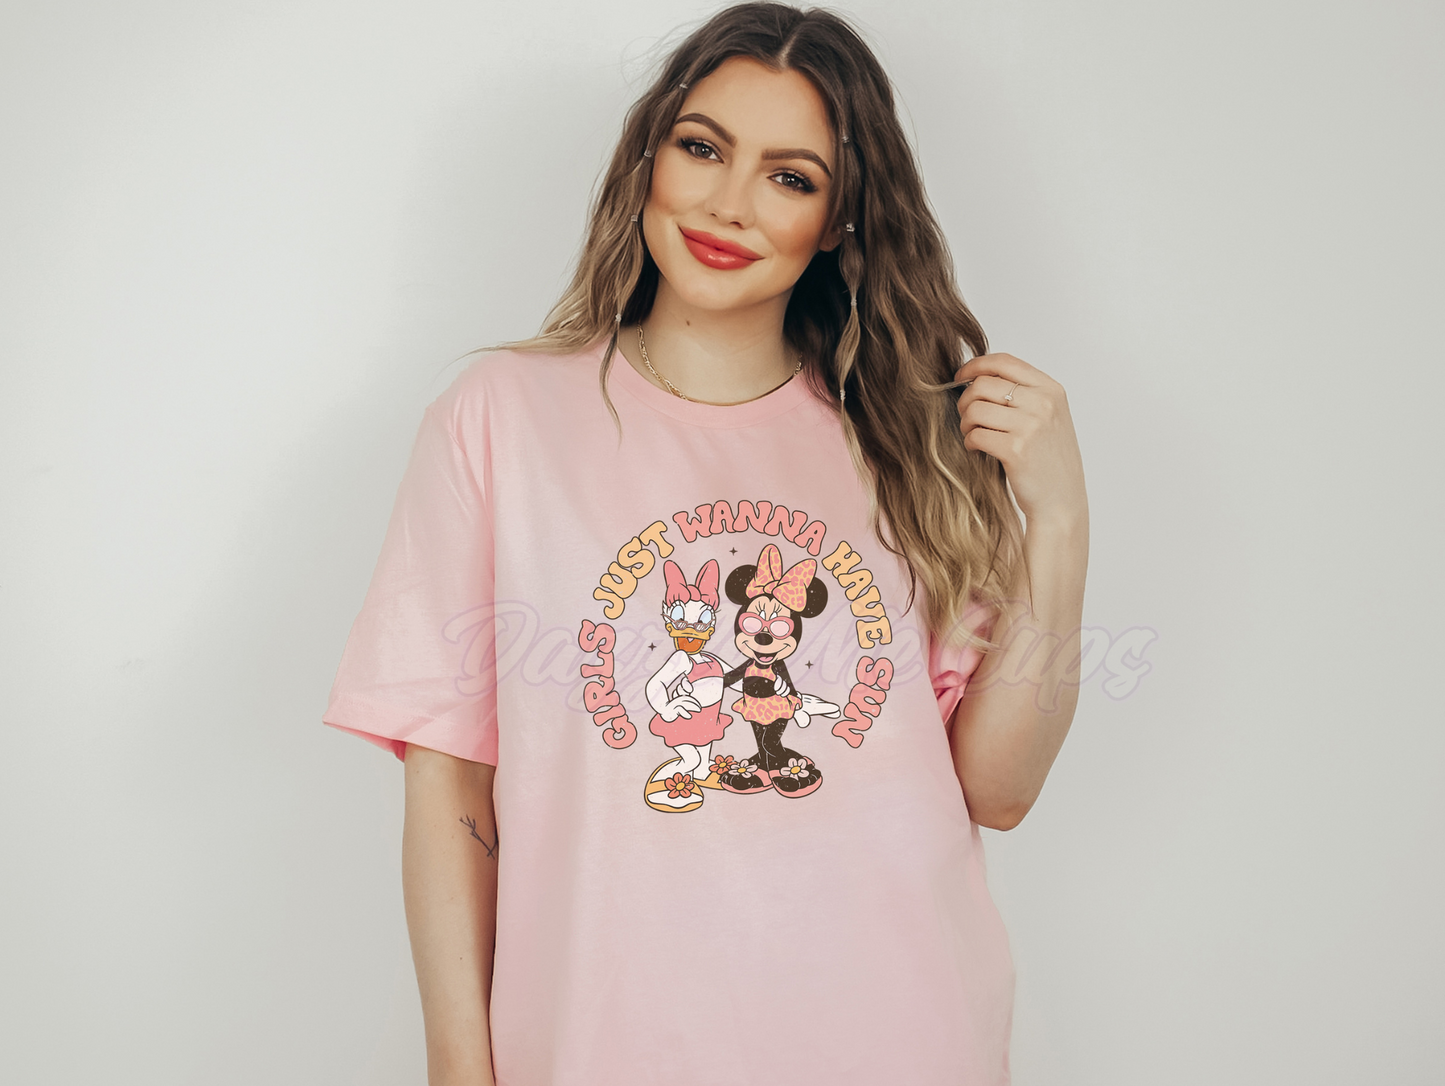 Girls Just Want to Have Fun Unisex Tshirt